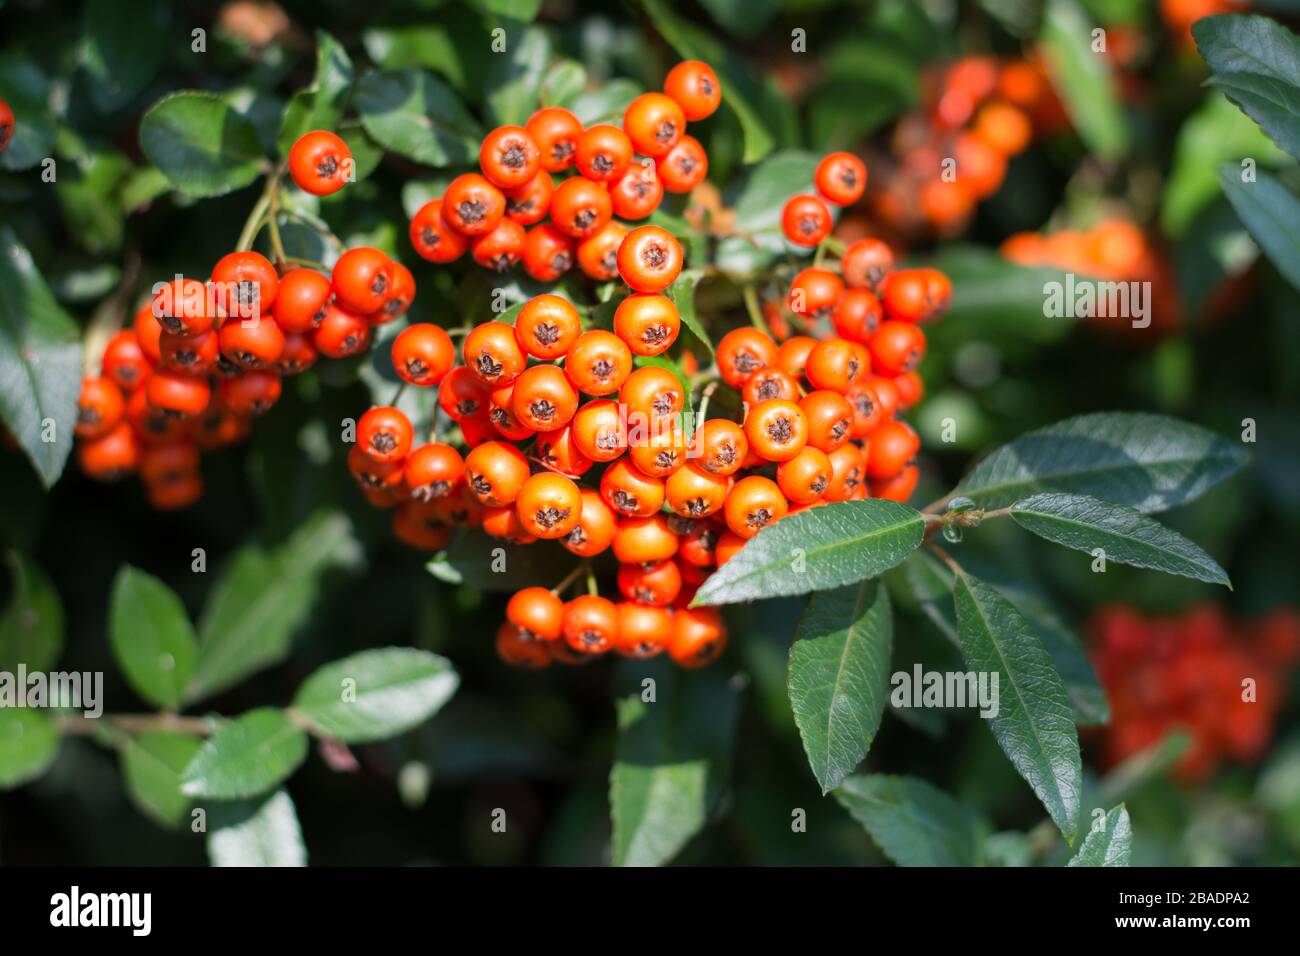 Bunch of orange firethorn berries surrounded with green leaves Stock Photo